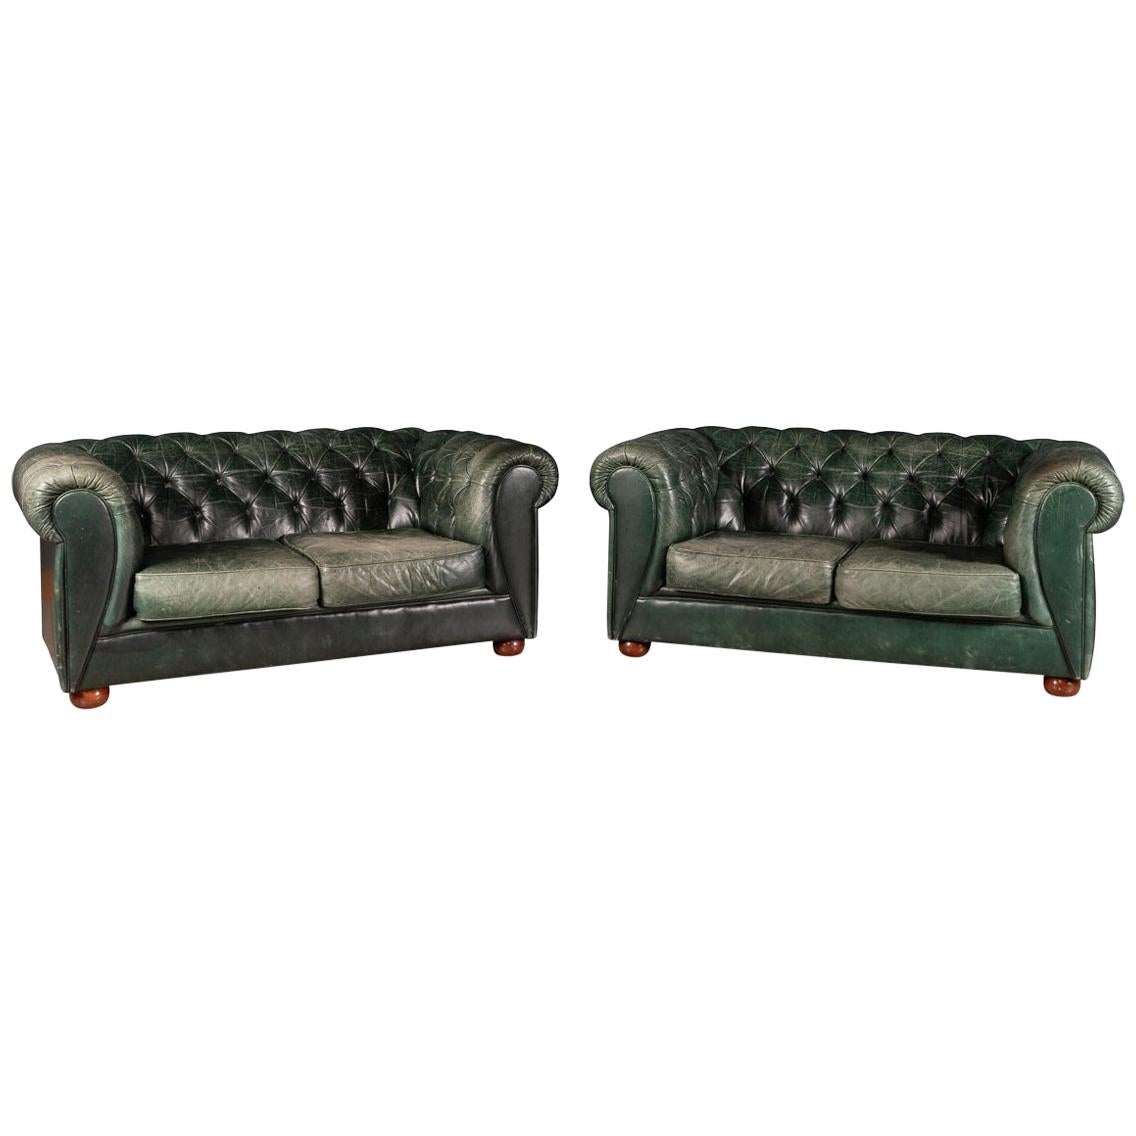 Elegant 20th Century Pair of Green Two-Seat Leather Chesterfield Sofas